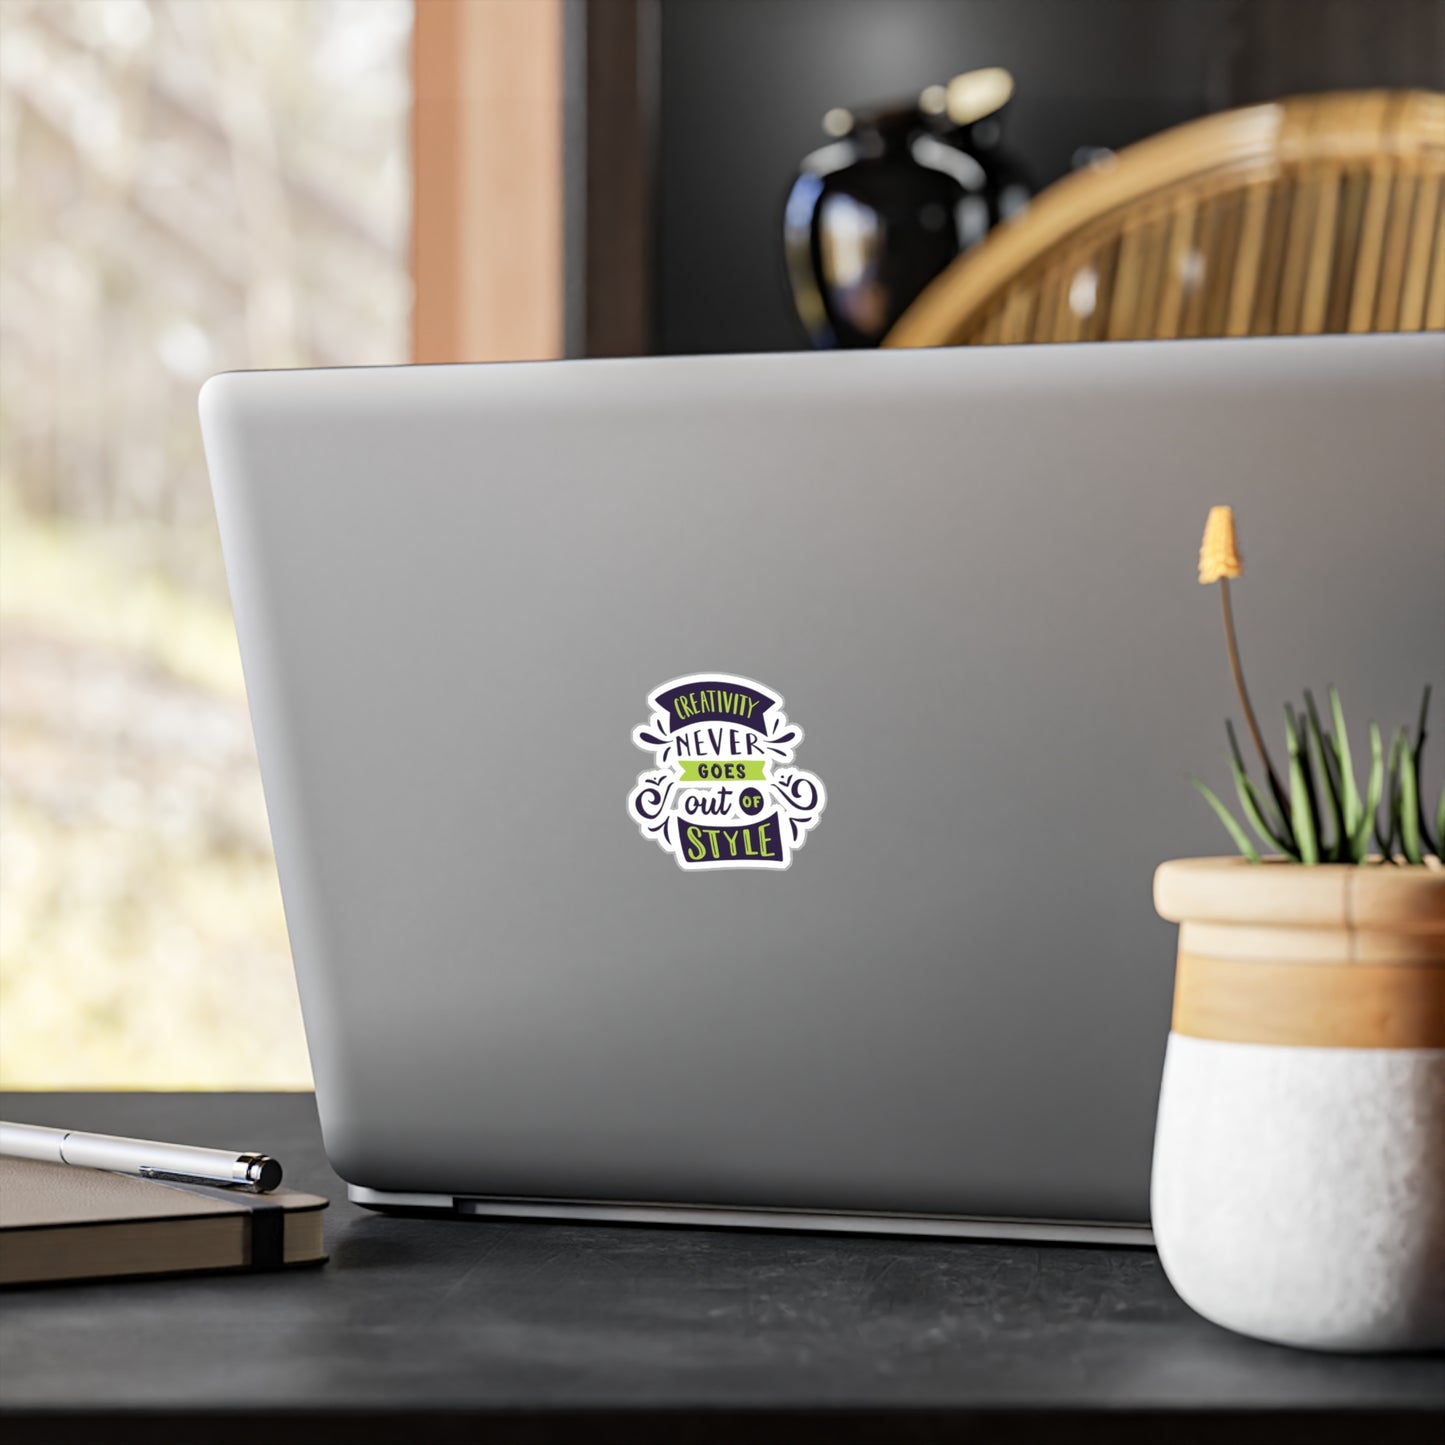 Creativity Never Goes Out Of Style Sticker - Motivational Treats